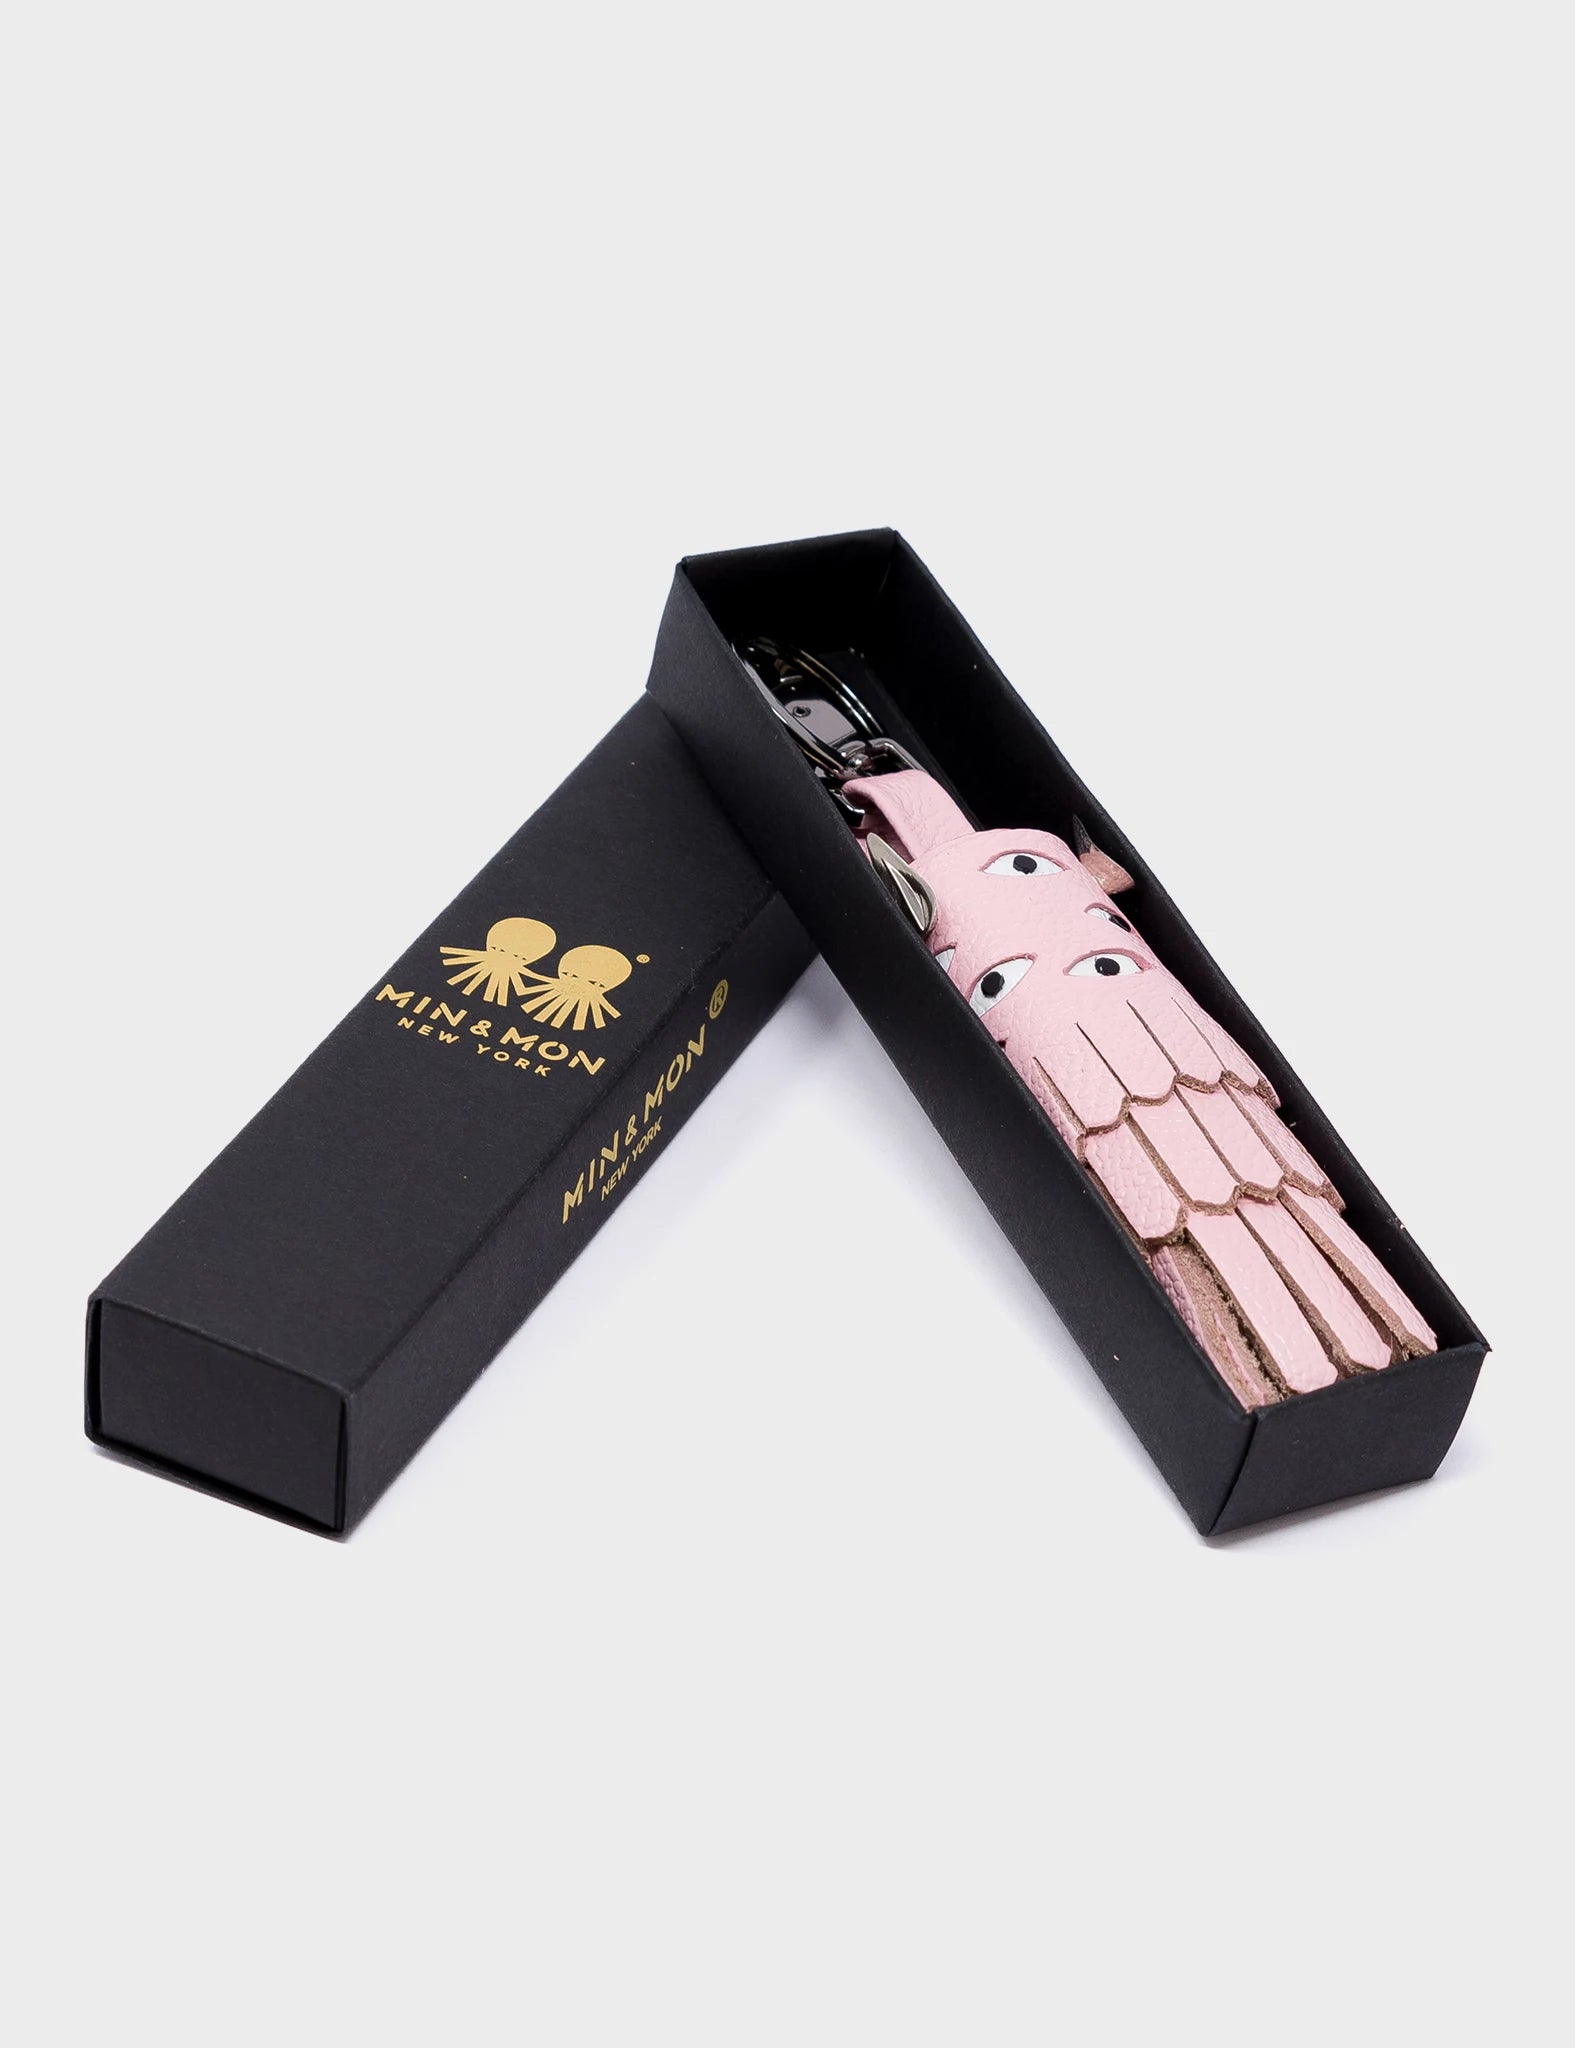 Oliver The Ox Charm - Parfait Pink Leather Keychain - Box 